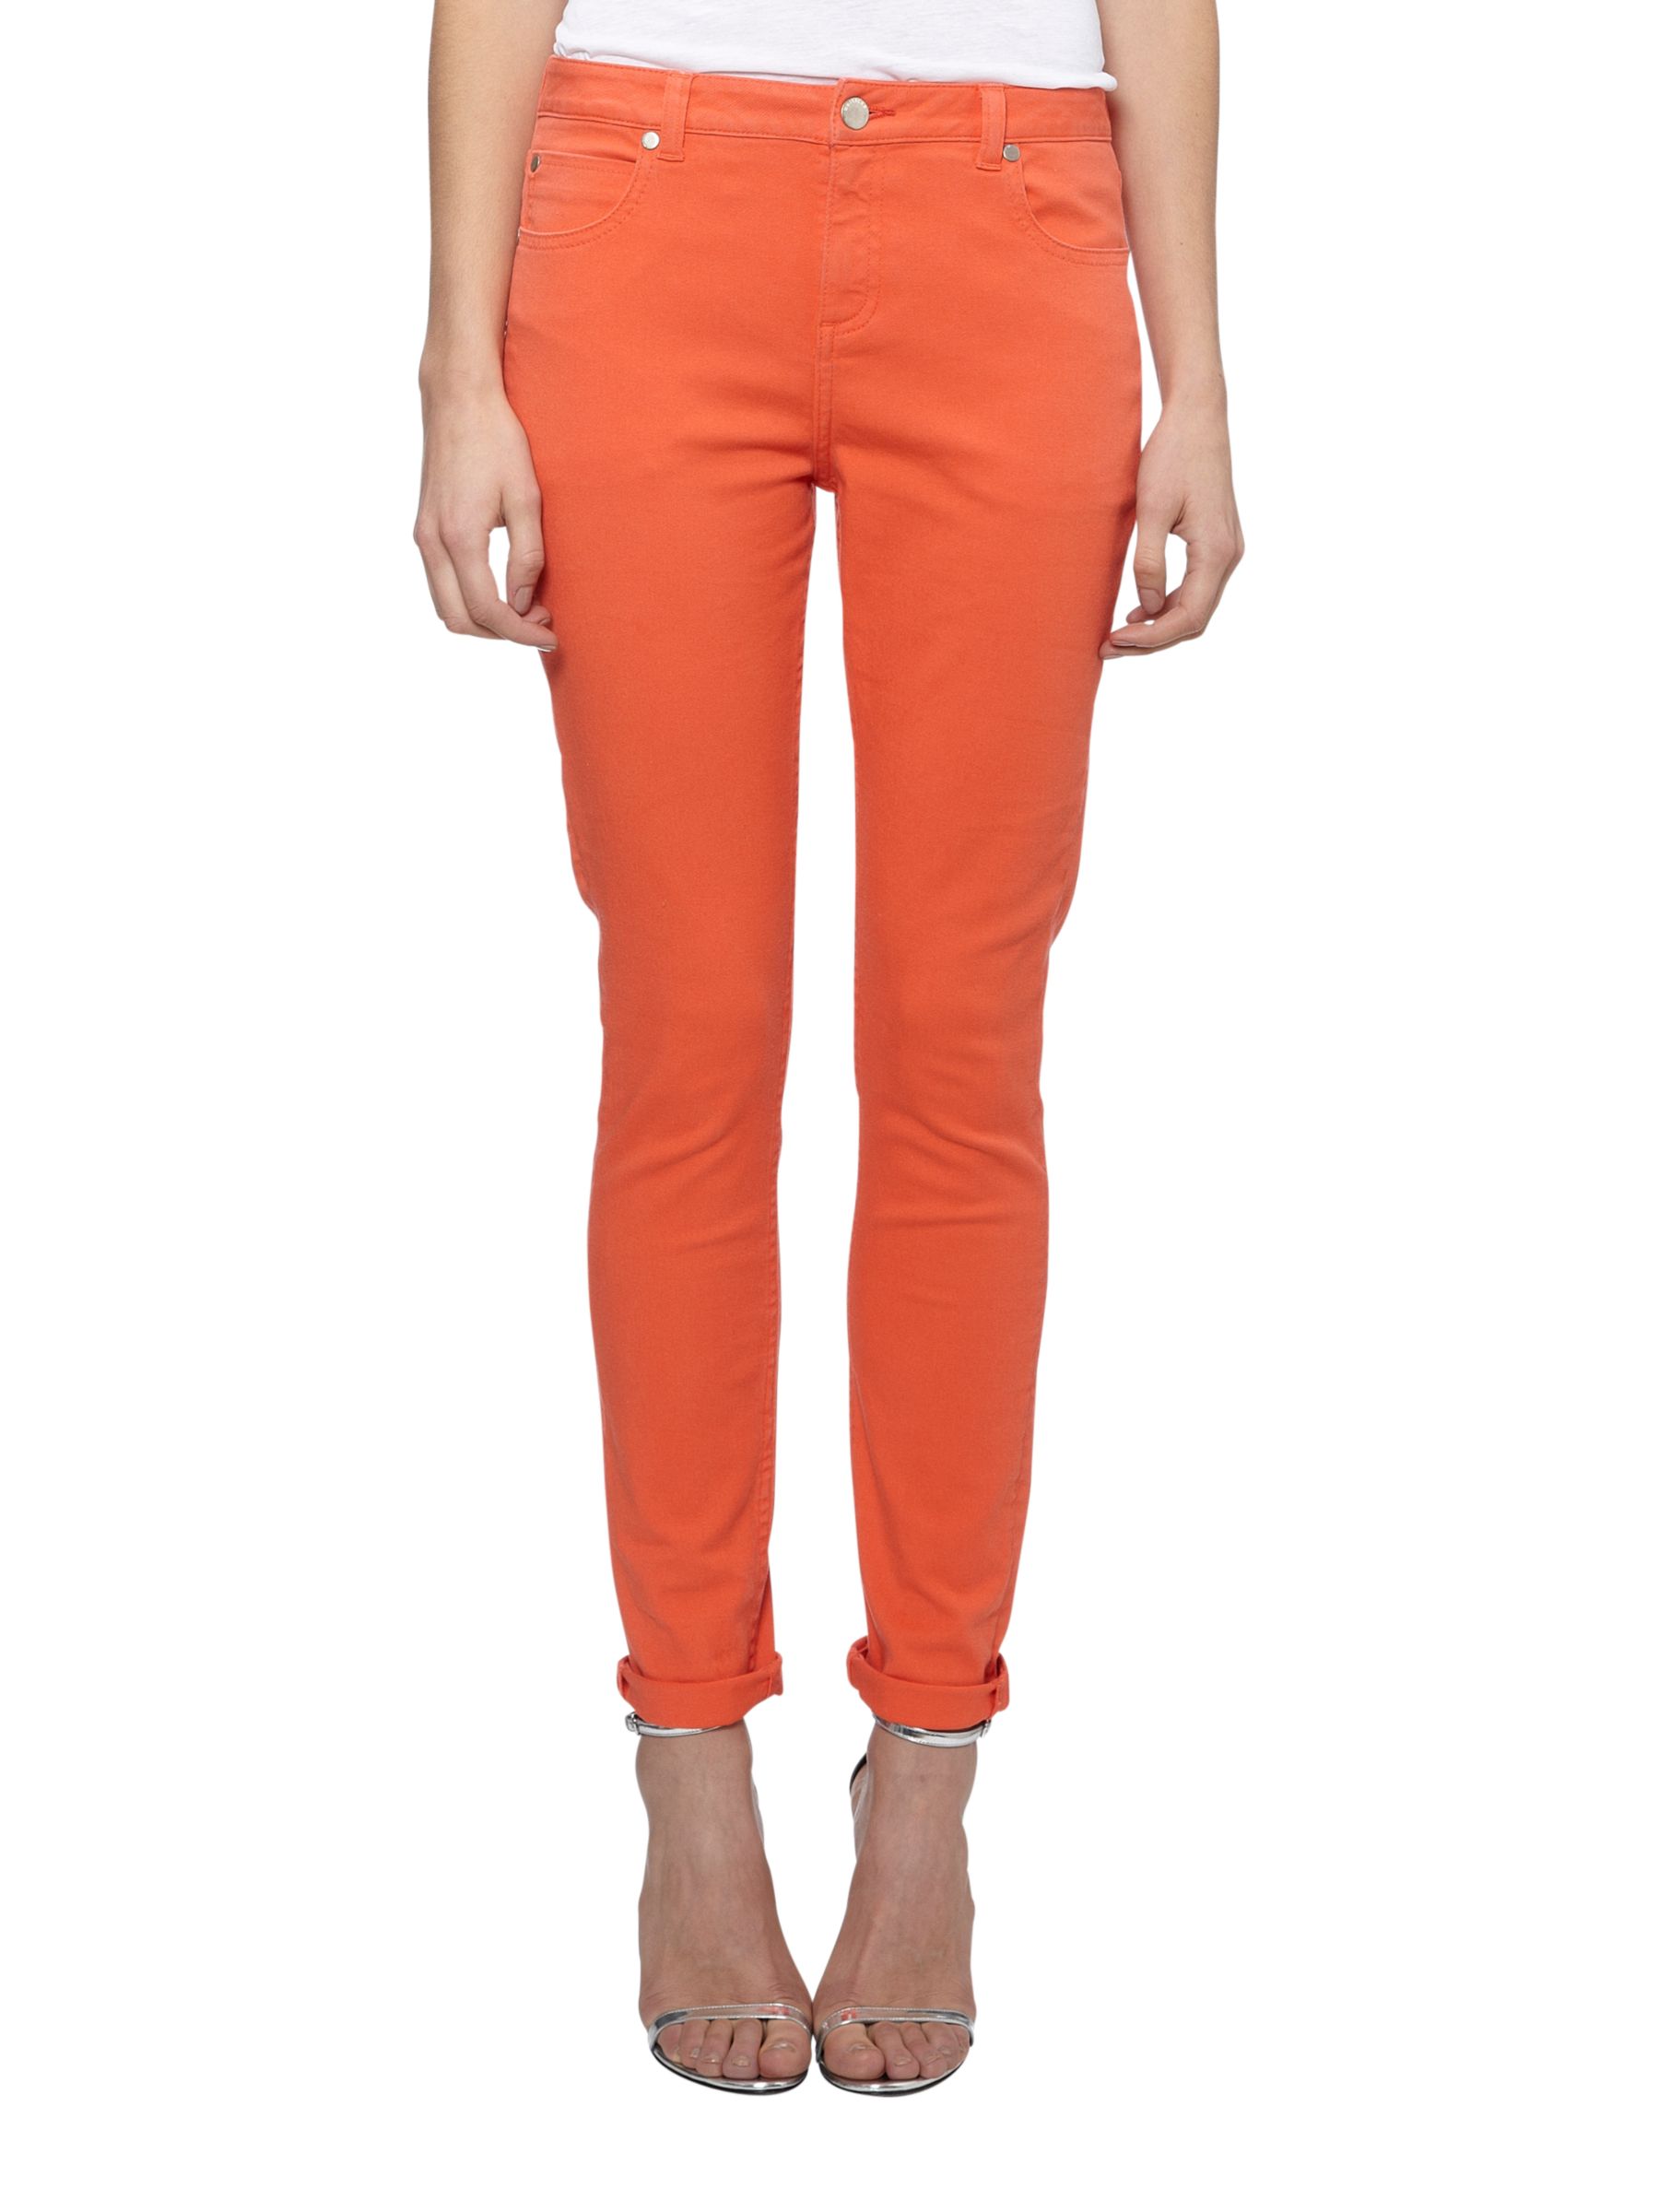 Whistles Charlie Coloured Skinny Jeans, Coral £80